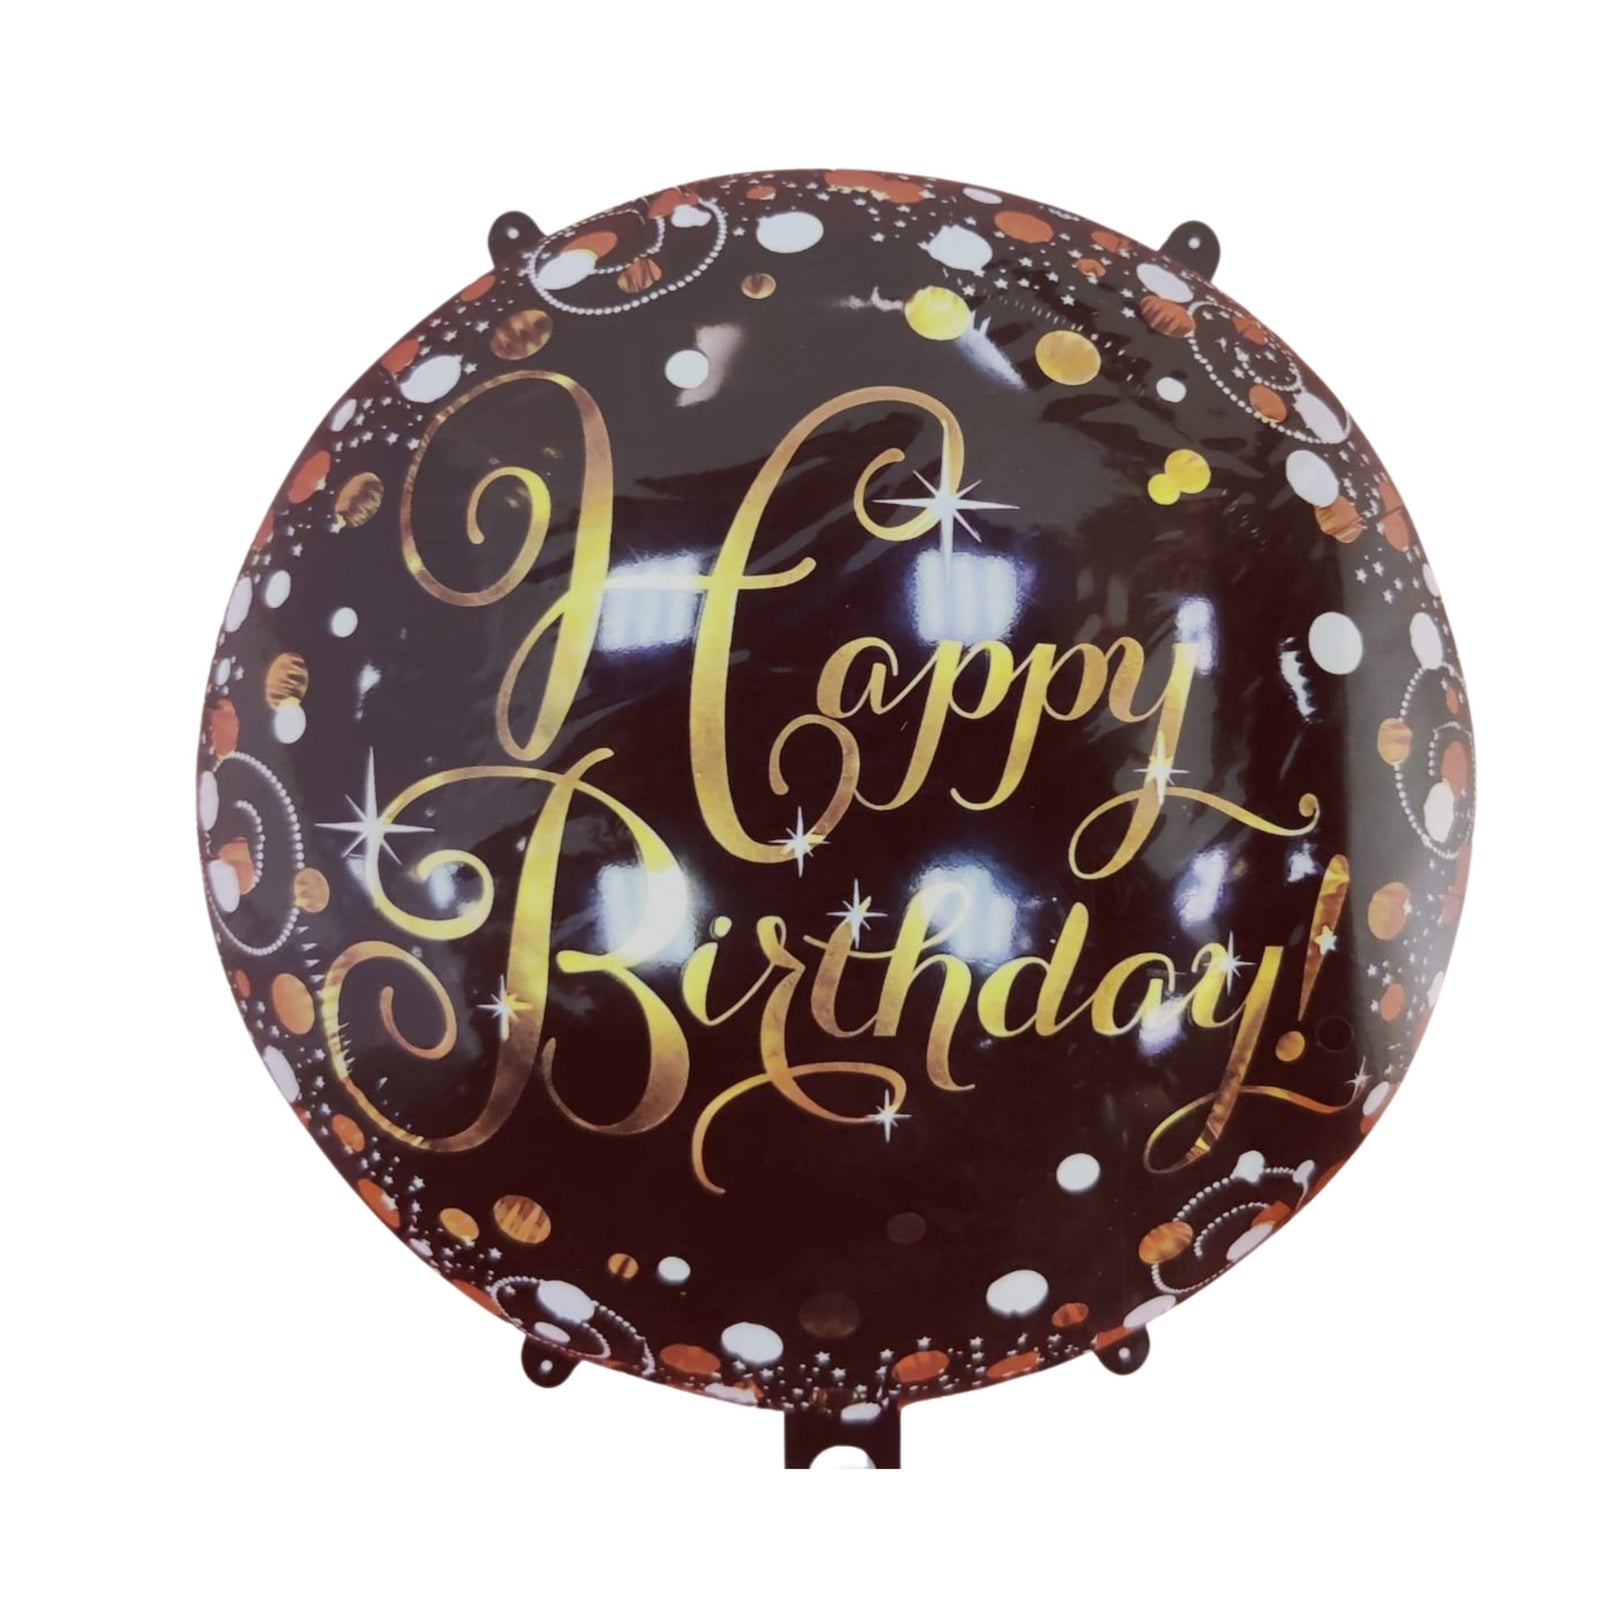 Happy Birthday Round Foil Balloons Black for Decoration, 18 Inches